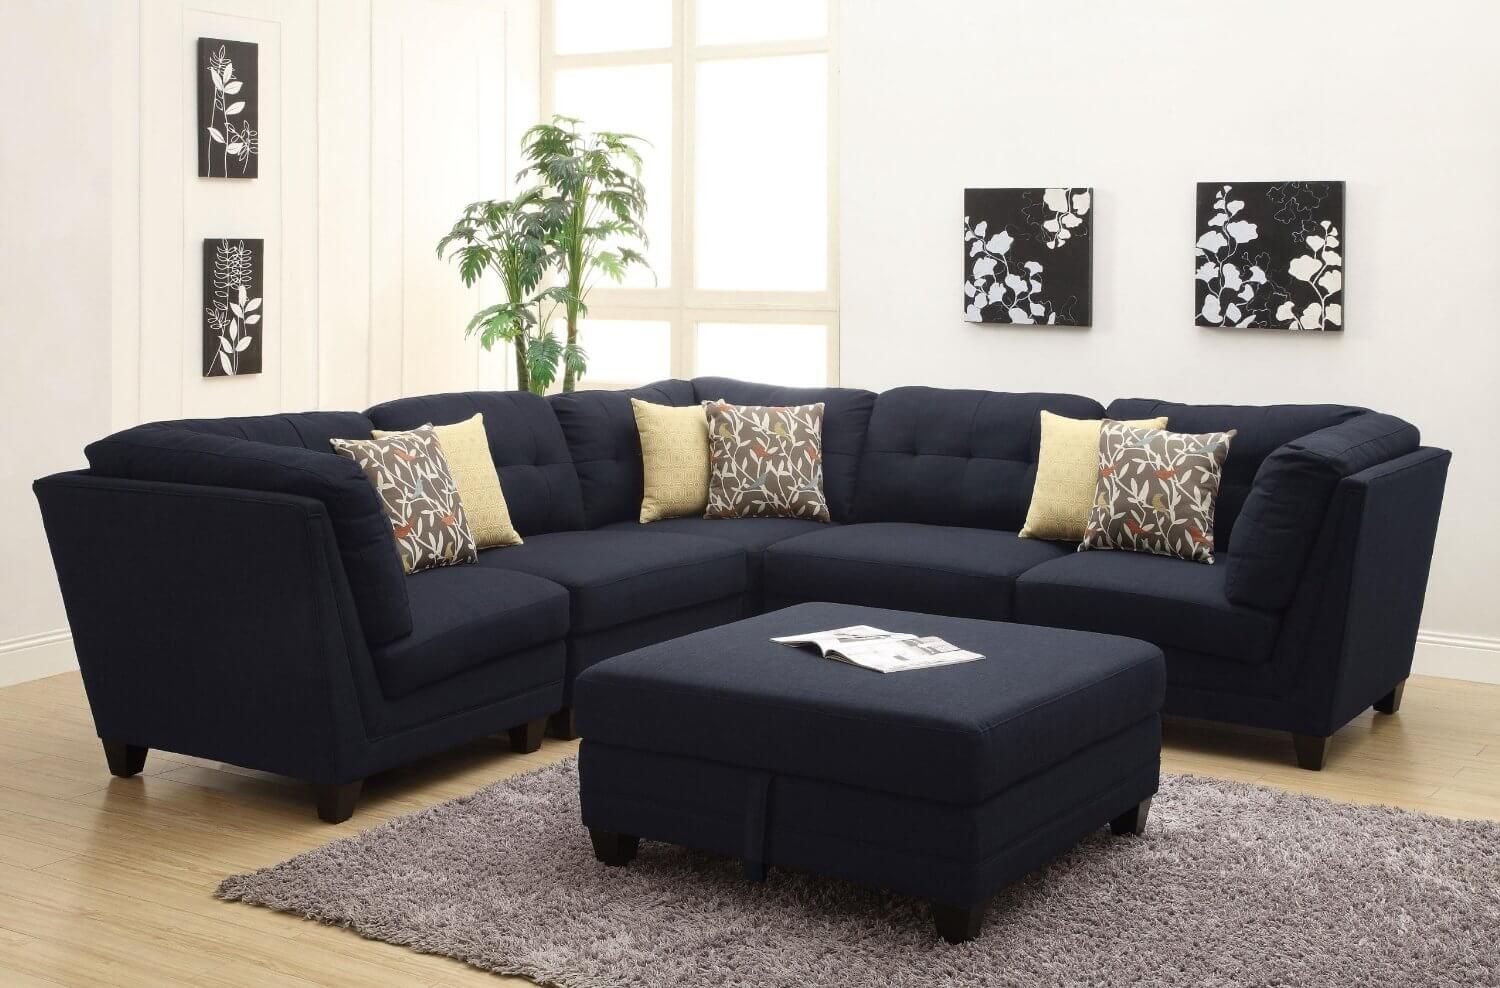 37 Beautiful Sectional Sofas Under $1,000 Within Dream Navy 3 Piece Modular Sofas (View 4 of 15)